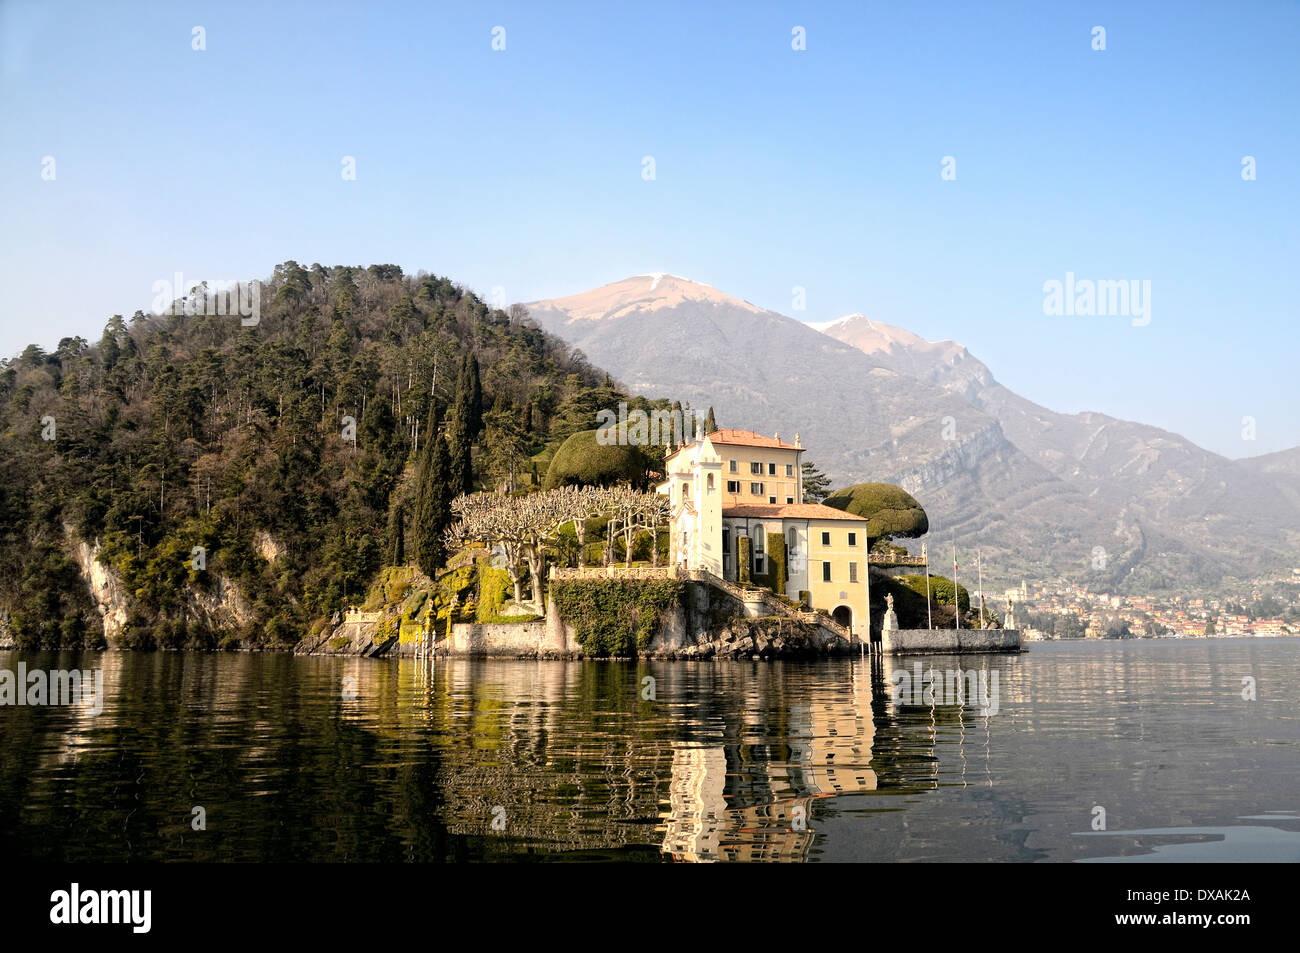 Villa del Balbianello taken from a boat on Lake Como the Villa is beautiful and recognizable from Star Wars and Casino Royale Stock Photo